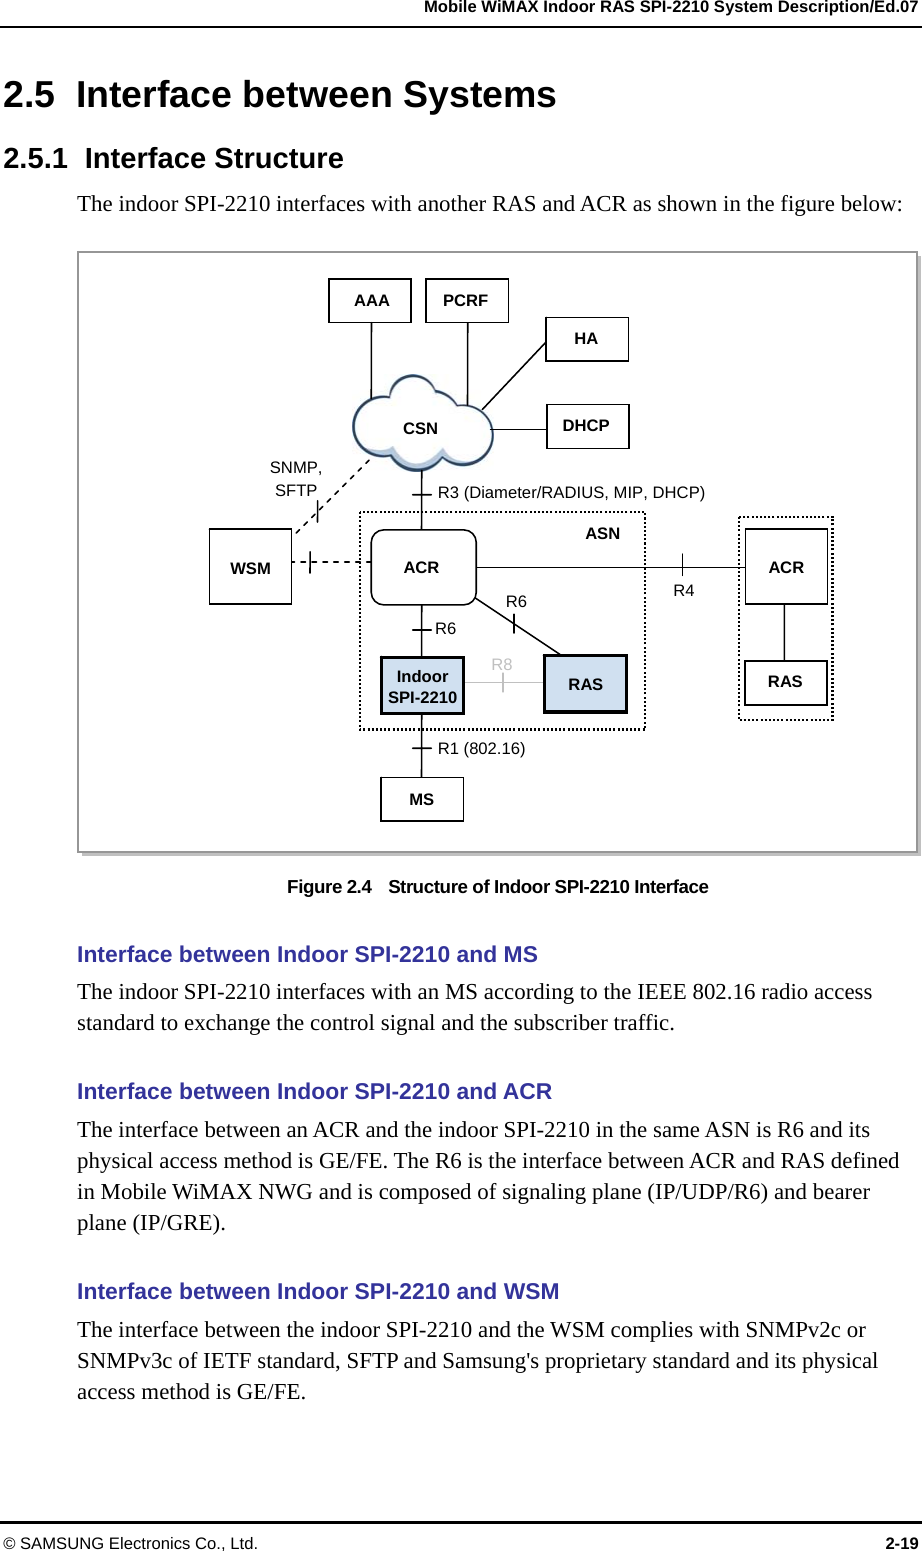   Mobile WiMAX Indoor RAS SPI-2210 System Description/Ed.07 © SAMSUNG Electronics Co., Ltd.  2-19 2.5 Interface between Systems  2.5.1 Interface Structure The indoor SPI-2210 interfaces with another RAS and ACR as shown in the figure below:  Figure 2.4    Structure of Indoor SPI-2210 Interface  Interface between Indoor SPI-2210 and MS The indoor SPI-2210 interfaces with an MS according to the IEEE 802.16 radio access standard to exchange the control signal and the subscriber traffic.  Interface between Indoor SPI-2210 and ACR The interface between an ACR and the indoor SPI-2210 in the same ASN is R6 and its physical access method is GE/FE. The R6 is the interface between ACR and RAS defined in Mobile WiMAX NWG and is composed of signaling plane (IP/UDP/R6) and bearer plane (IP/GRE).  Interface between Indoor SPI-2210 and WSM The interface between the indoor SPI-2210 and the WSM complies with SNMPv2c or SNMPv3c of IETF standard, SFTP and Samsung&apos;s proprietary standard and its physical access method is GE/FE. CSN AAA ACR R3 (Diameter/RADIUS, MIP, DHCP) R6 R1 (802.16) R4SNMP, SFTP PCRF MS WSM Indoor SPI-2210 RASR6 R8 ACRRAS HA ASN DHCP